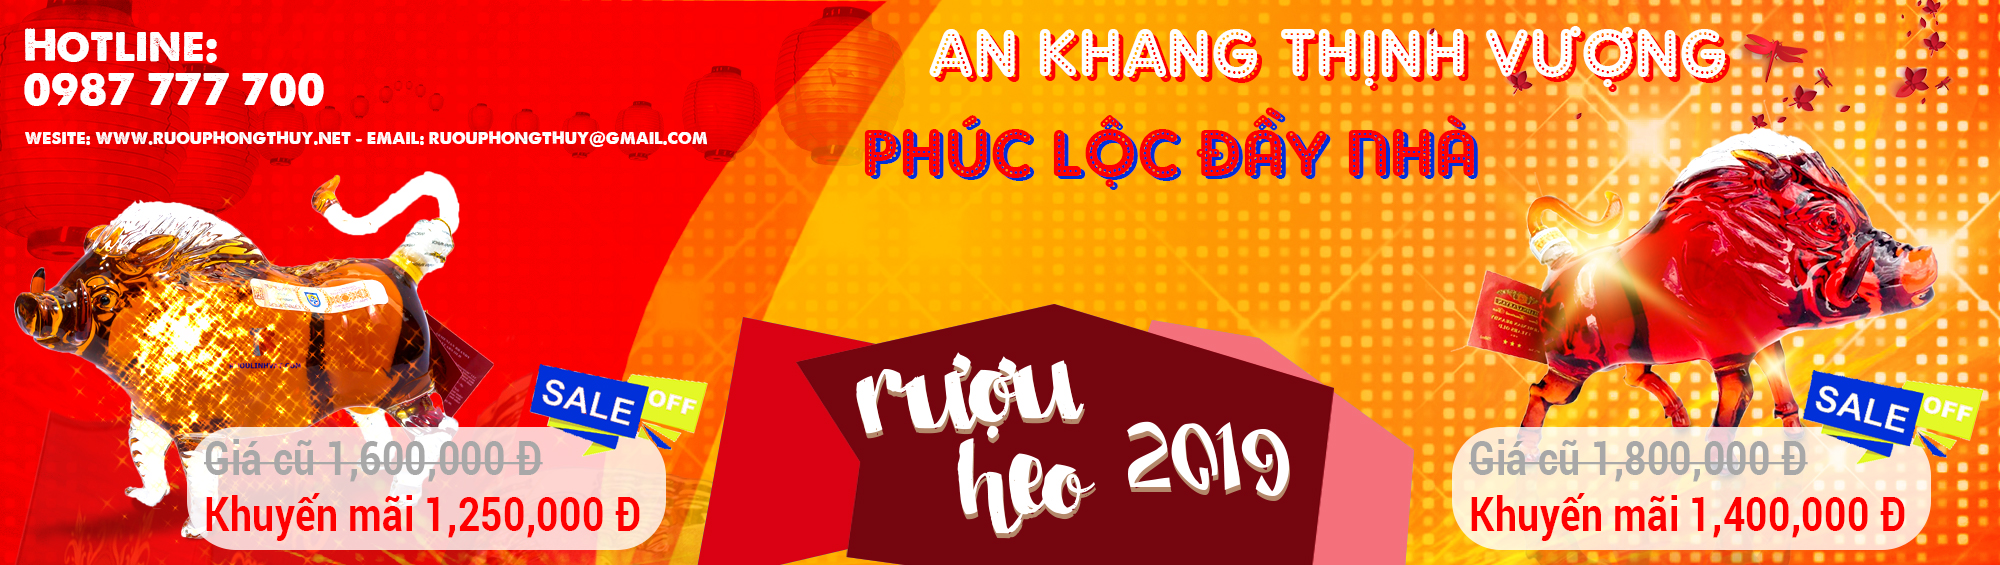 banner ruou heo 2019